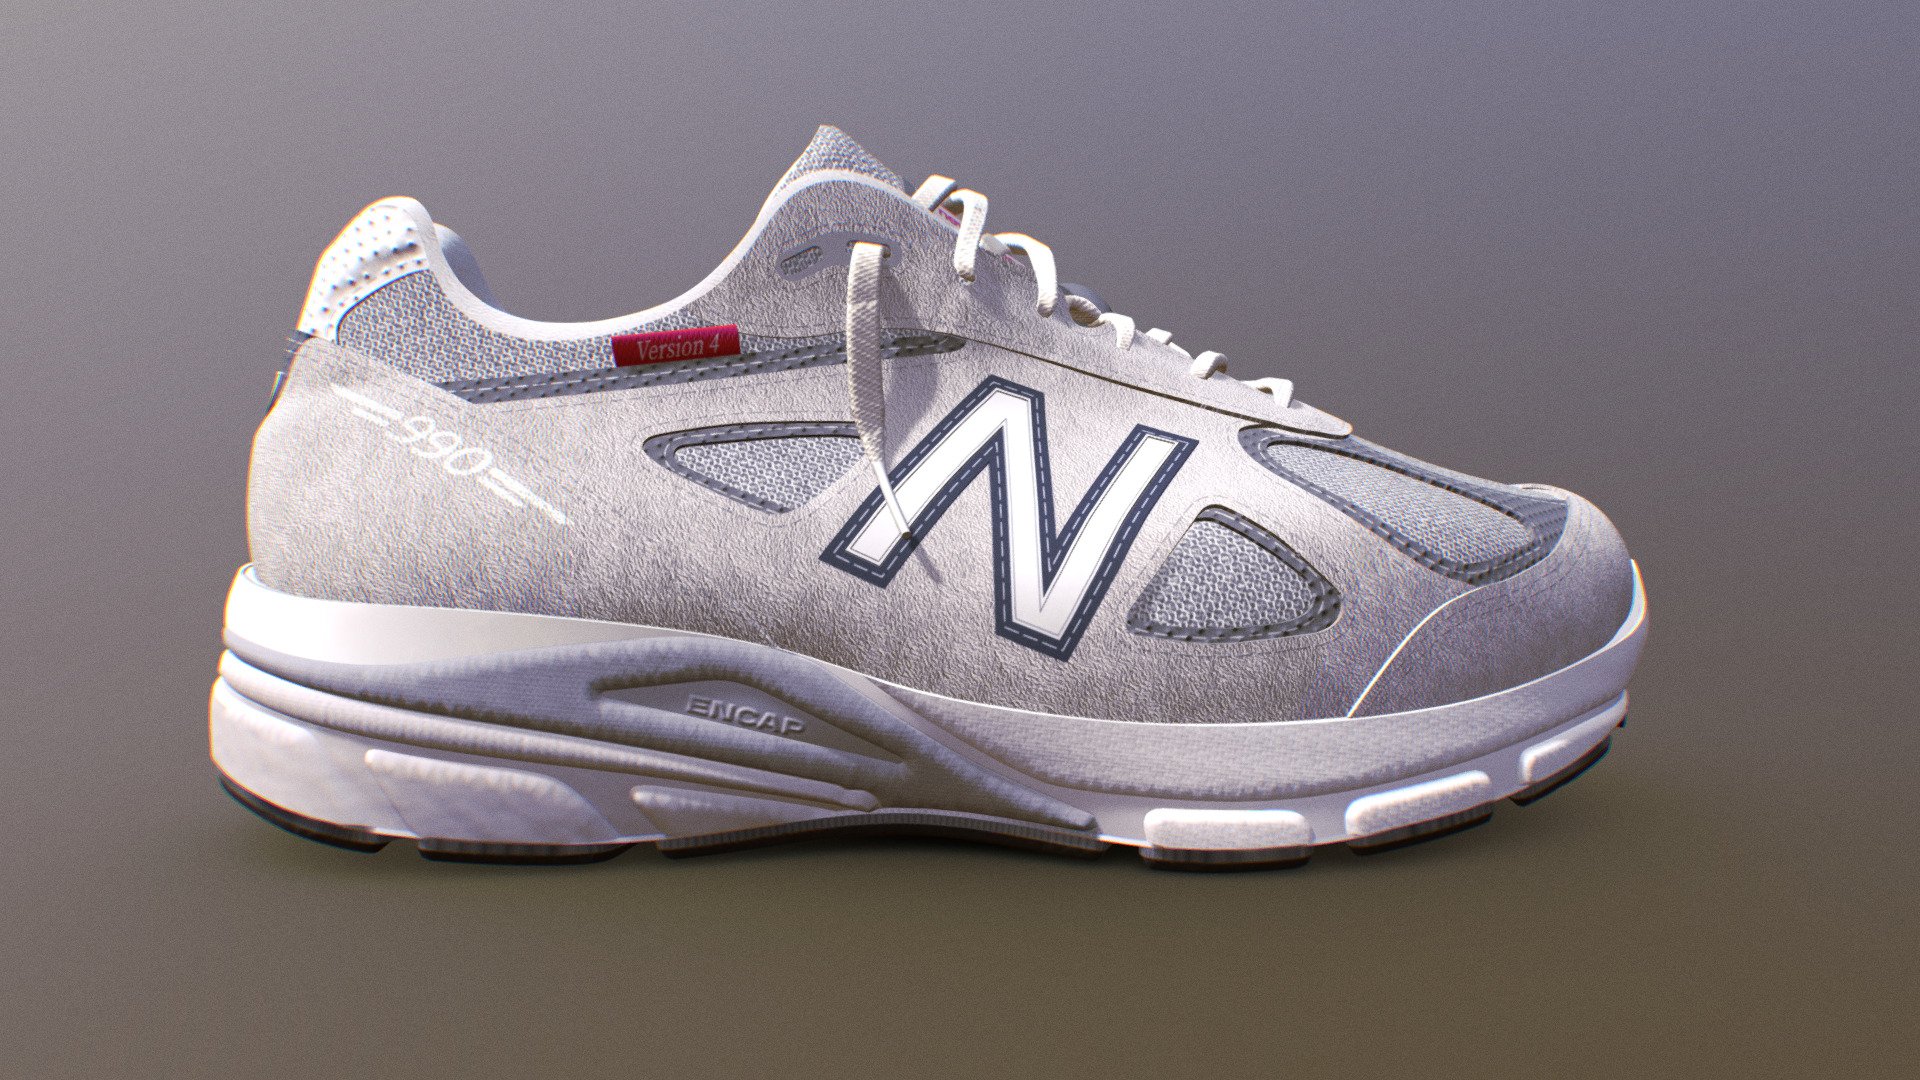 Created with Botcha3D: https://botcha3d.com

A favorite of celebrities, businesspeople, and serious runners alike, the New Balance 990 has delivered on that promise and then some. Manufactured in the US for over 75 years and representing a limited portion of our US sales, New Balance Made is a premium collection that contains a domestic value of 70% or greater. 

Credits: Beatrice Severin - New Balance 990 V4 - 3D model by Botcha3D 3d model